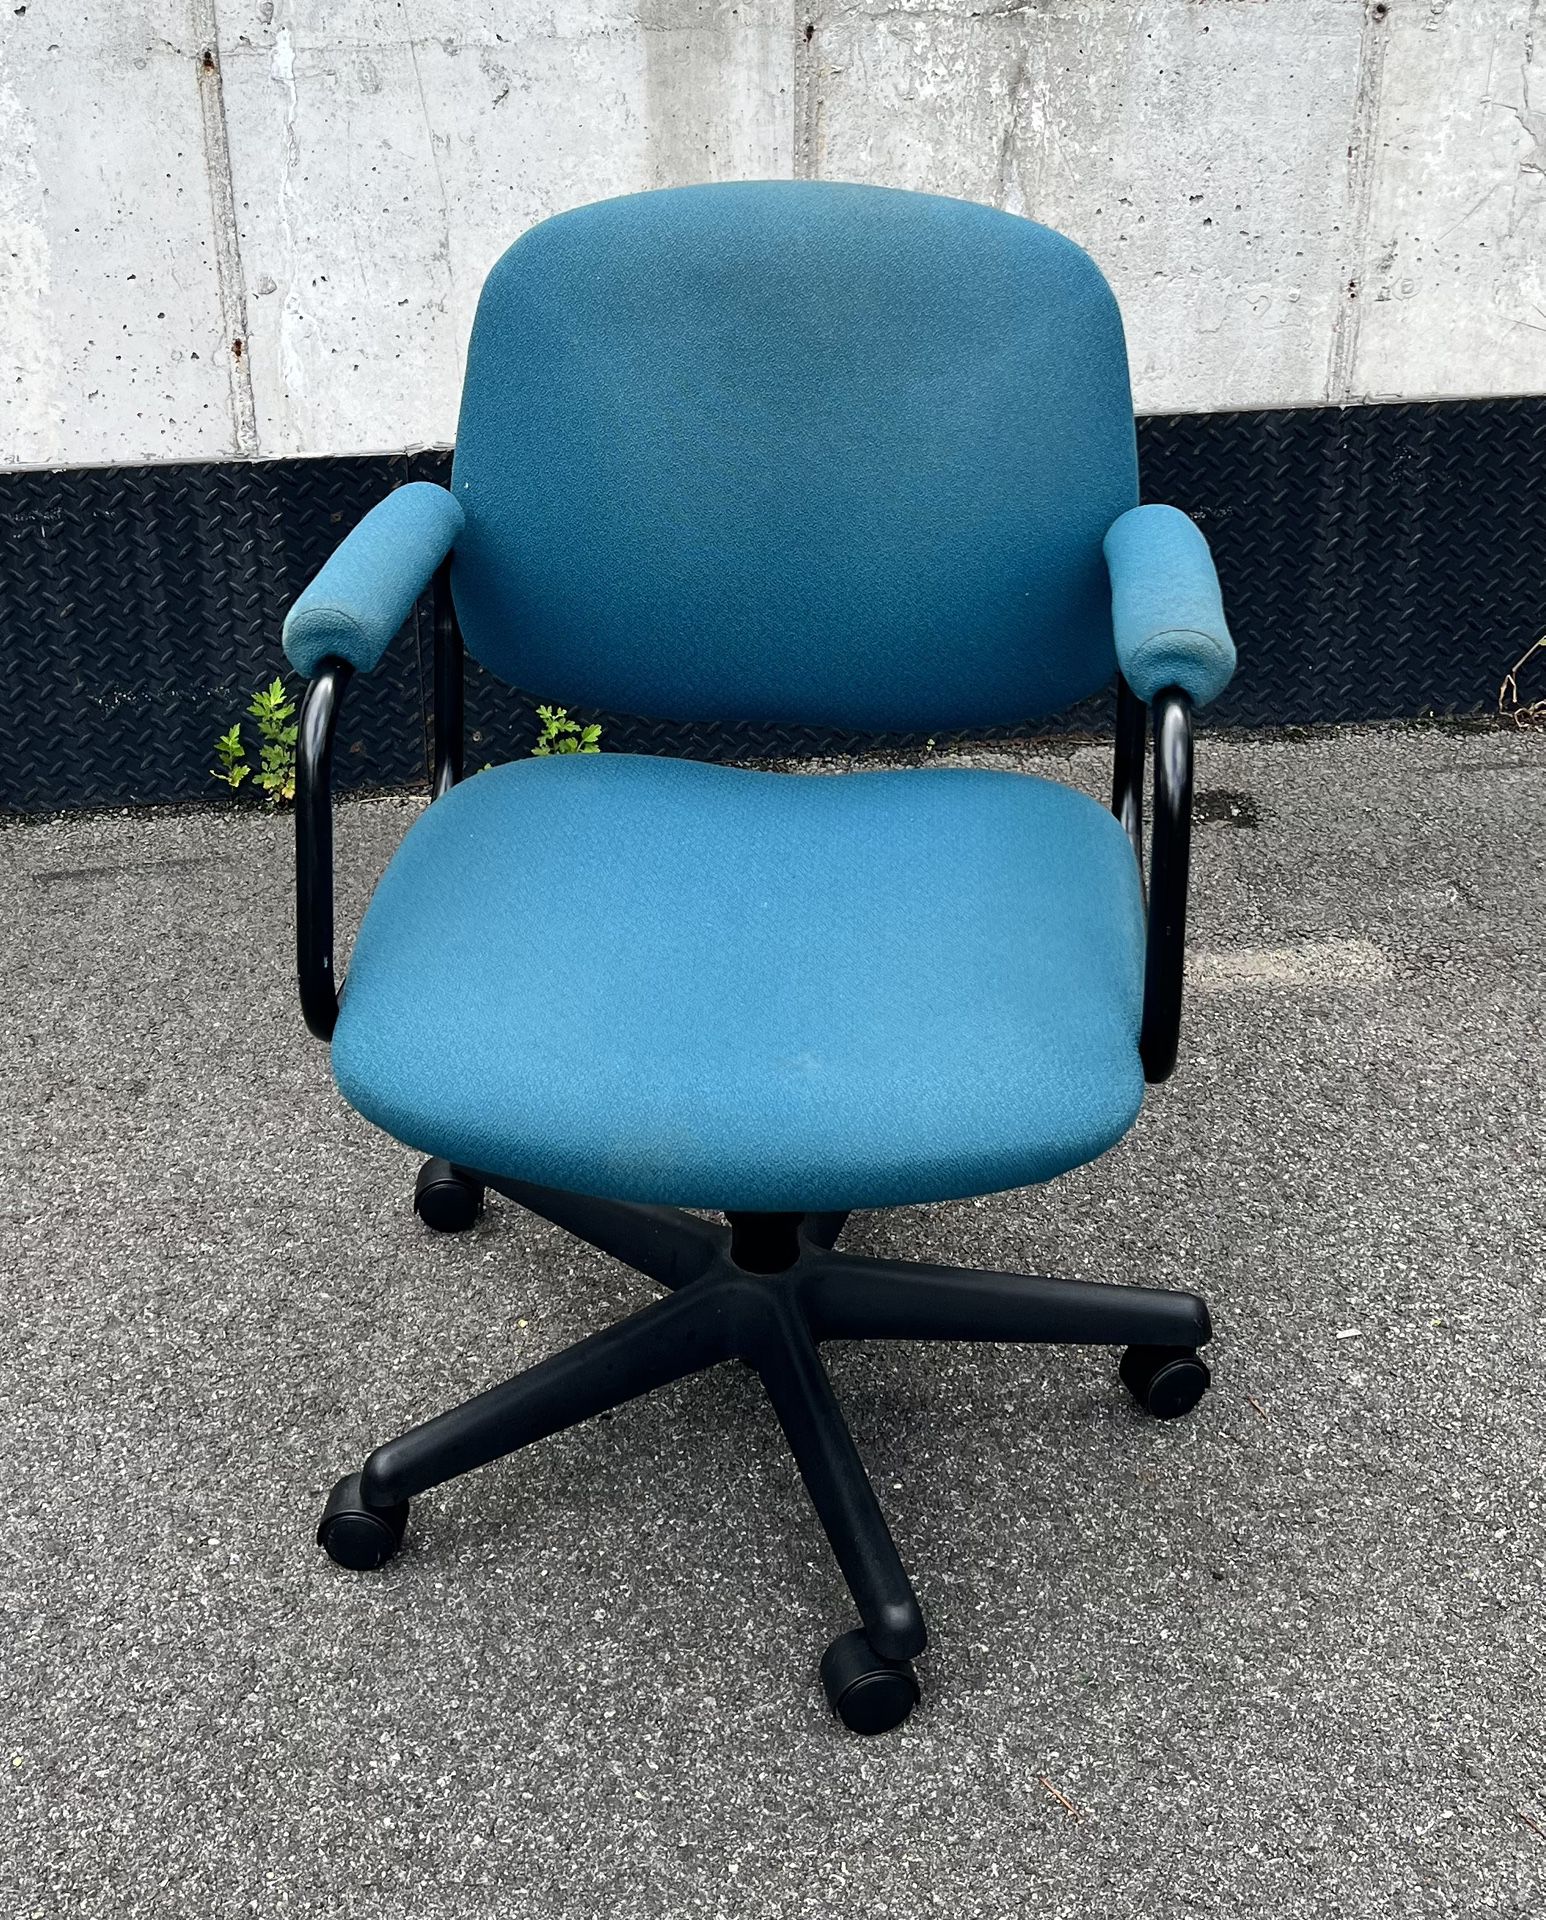 Free Delivery 🚚 Desk Chair With Wheels 